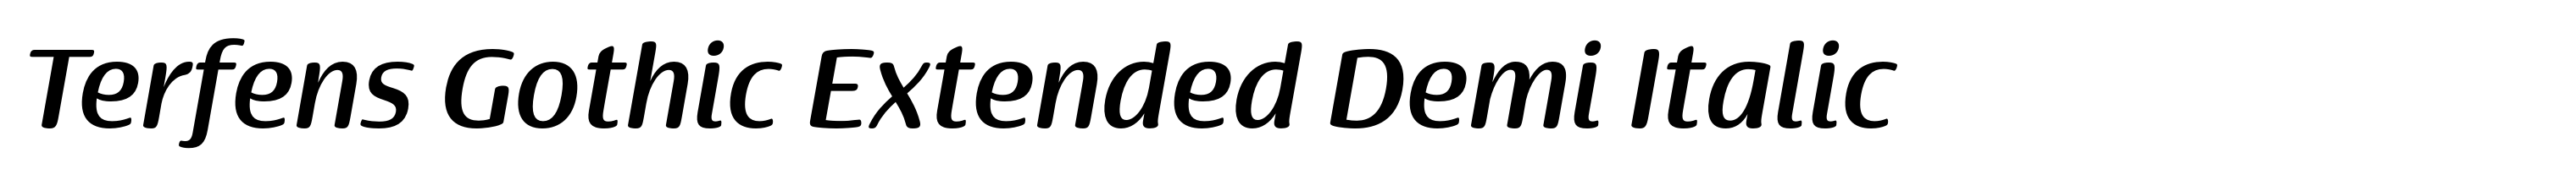 Terfens Gothic Extended Demi Italic